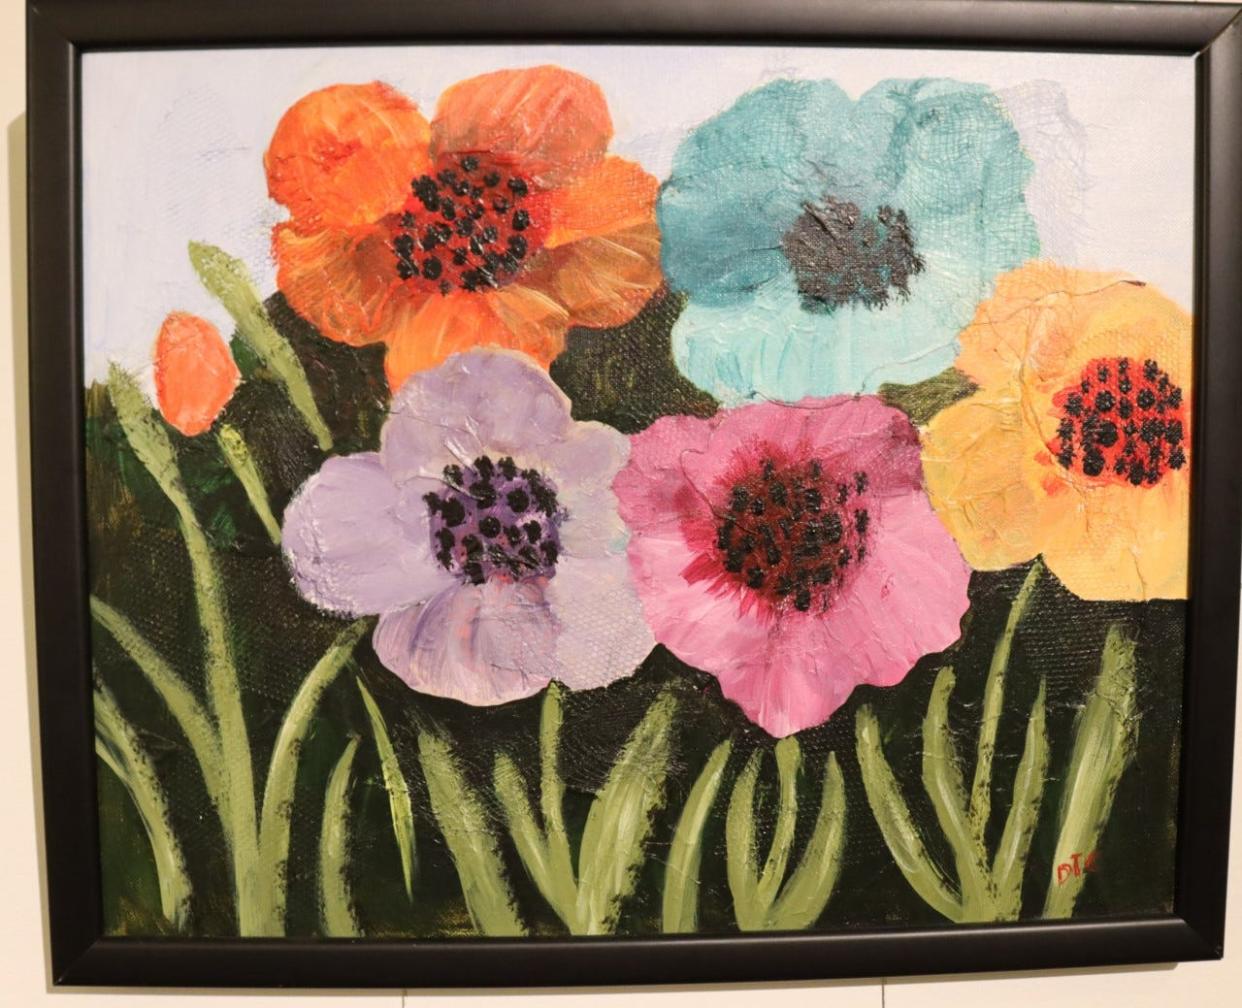 Shown is a piece from the “Earth: Our Home" art exhibit at the Sisters, Servants of the Immaculate Heart of Mary Motherhouse. The exhibit runs through May 5.